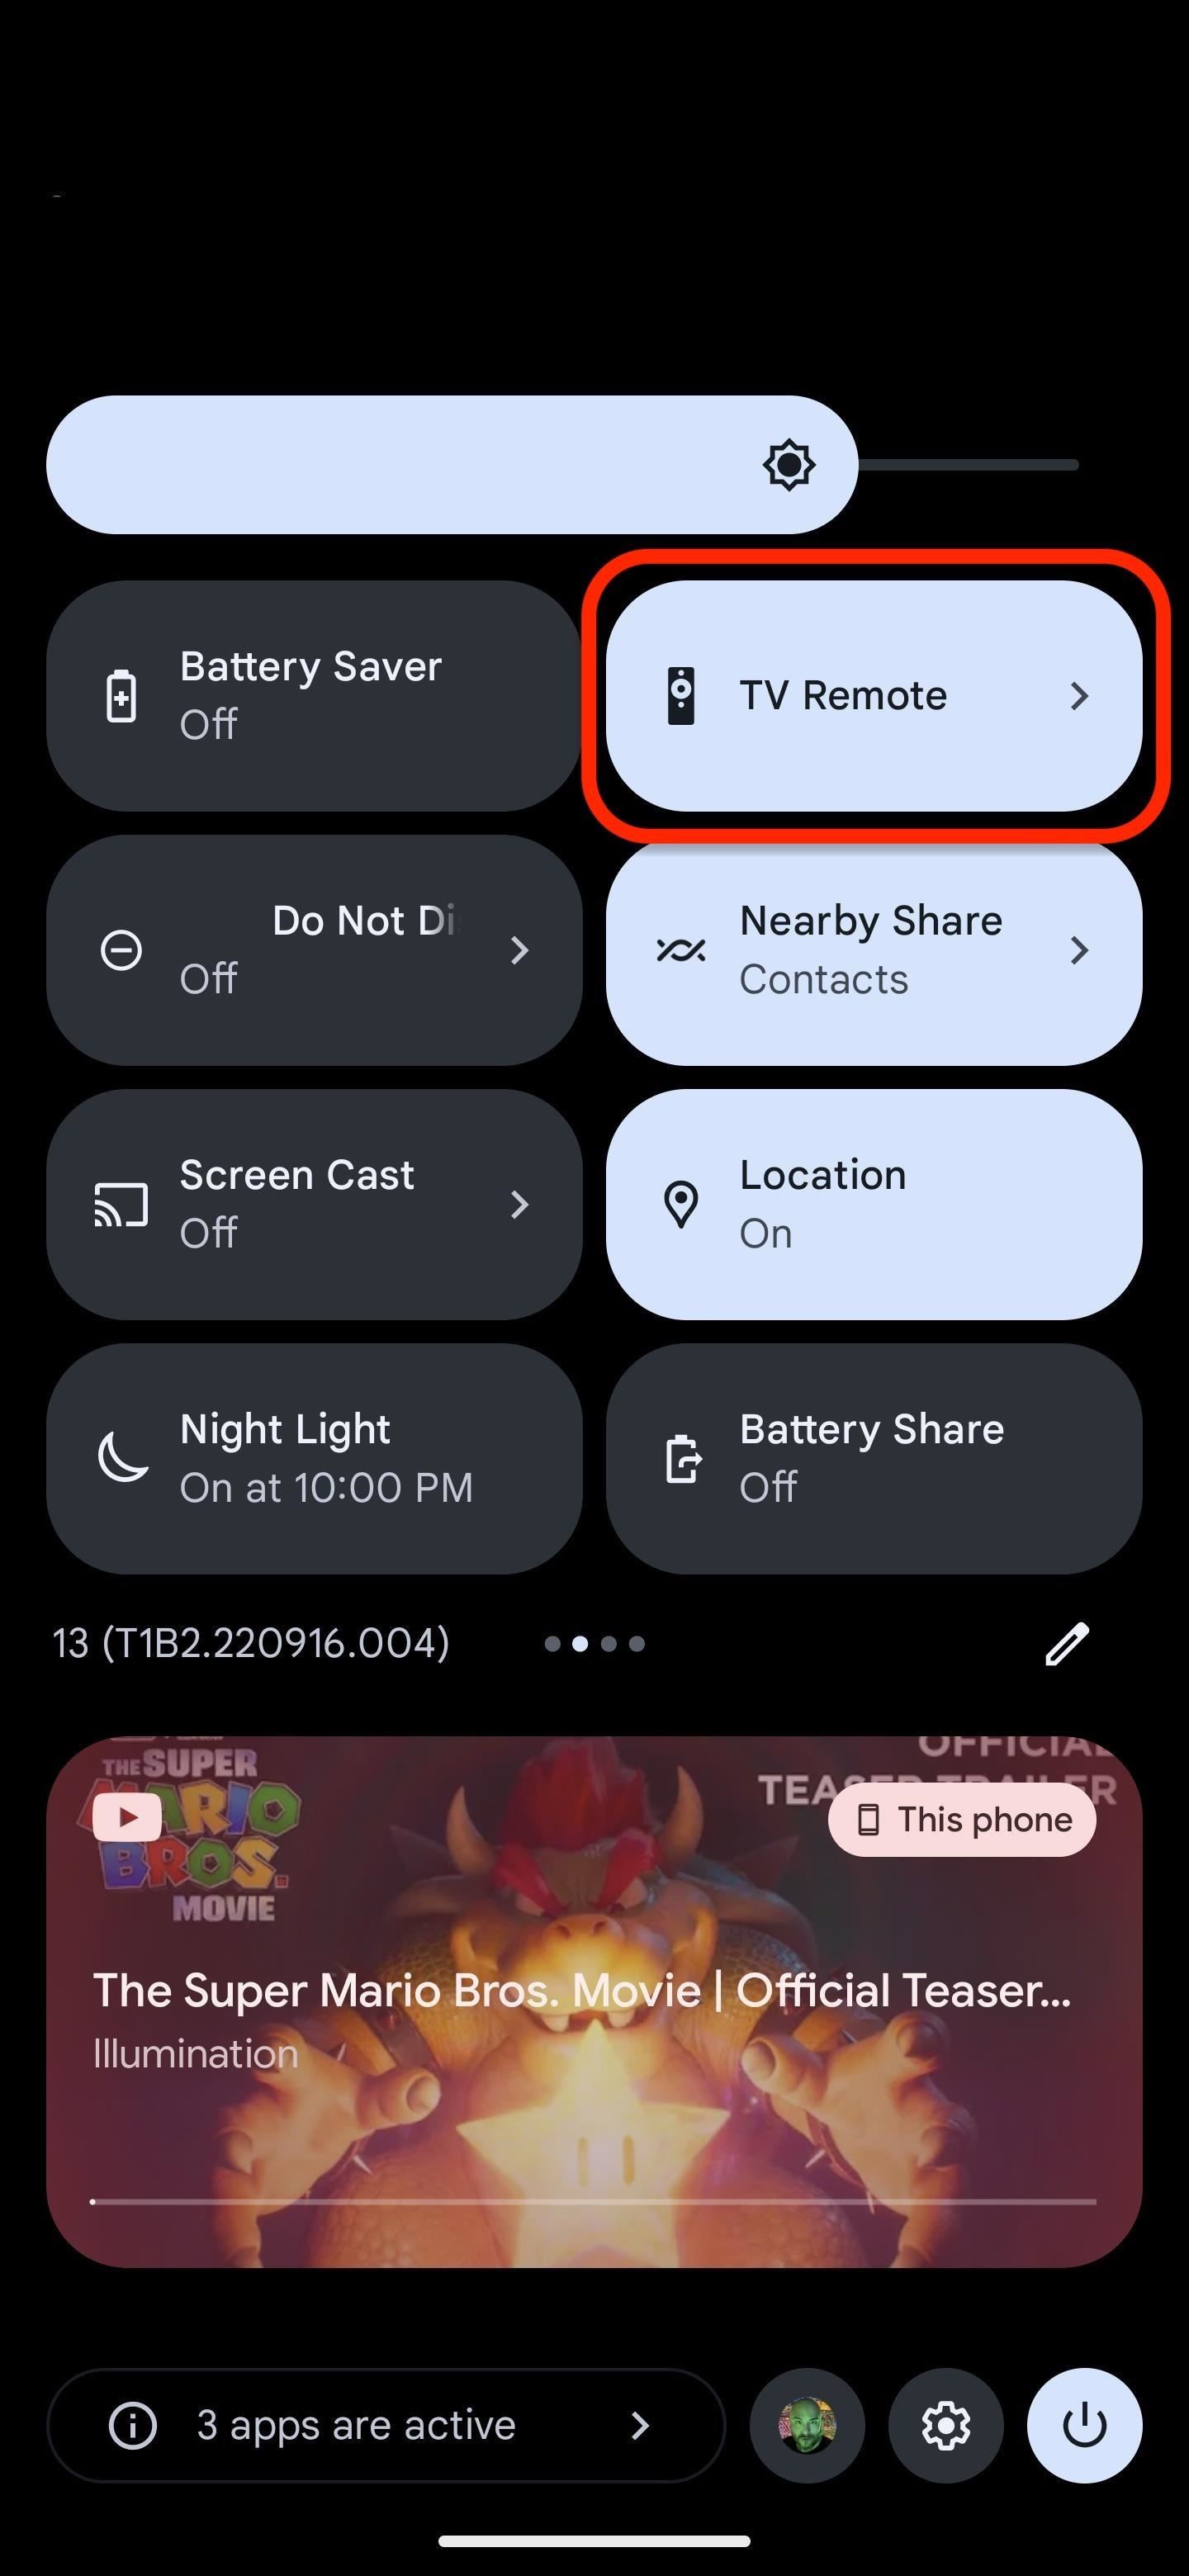 How to Use Your iPhone or Android Phone as a Remote for Android TV or Google TV